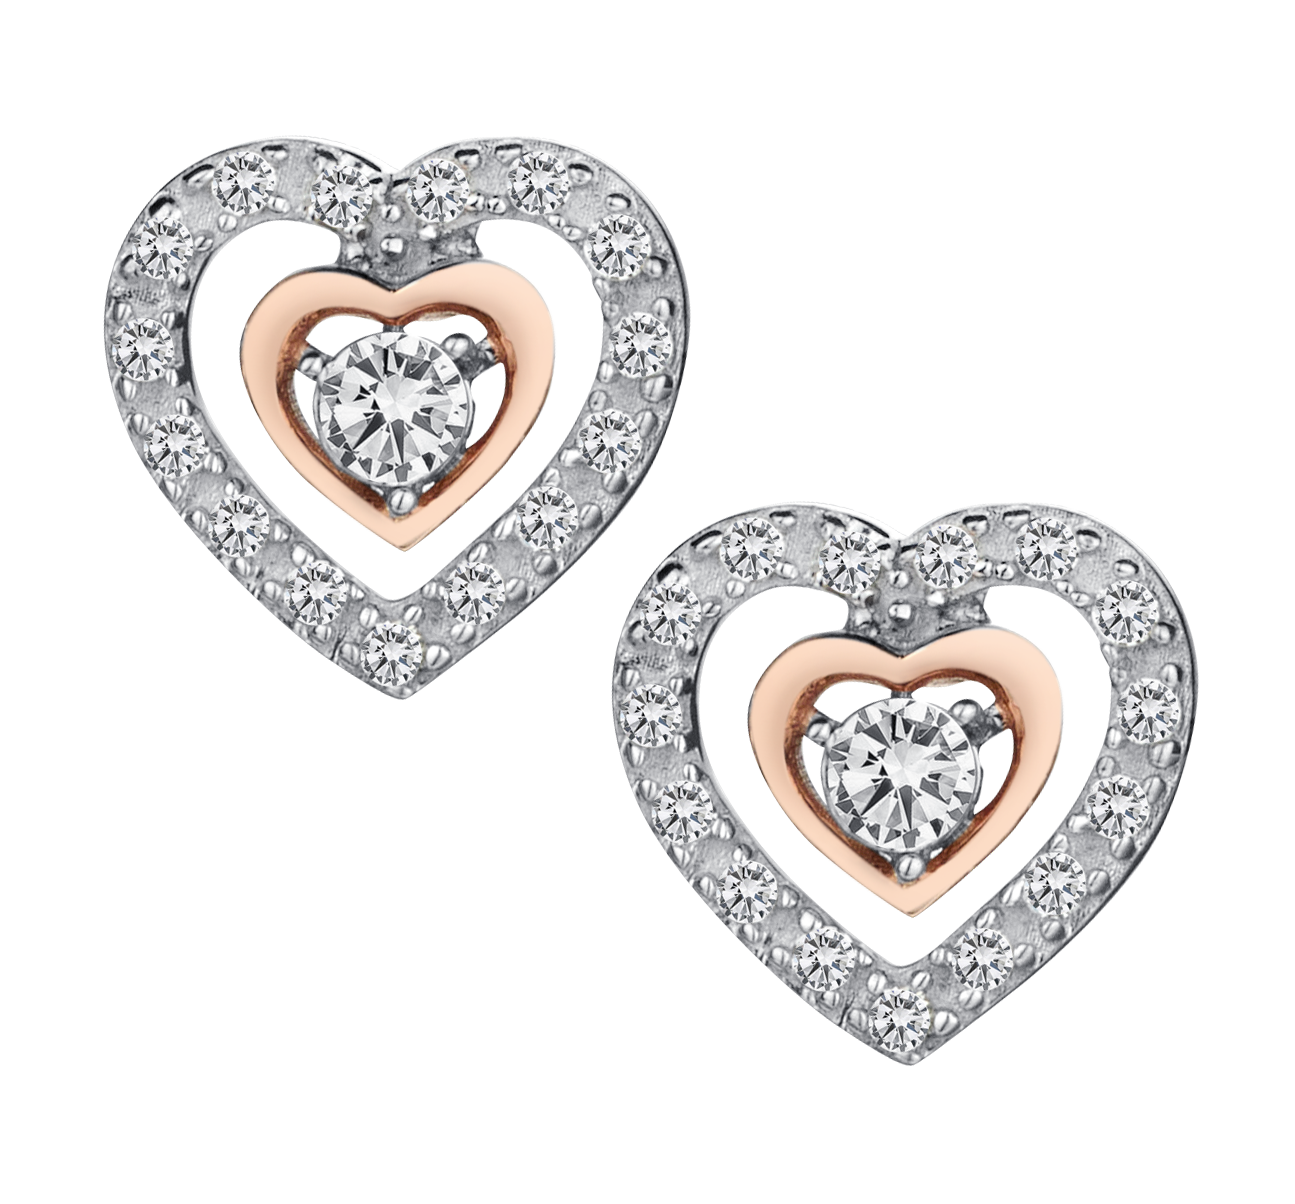 .10 Carat of Diamonds "Double Hearts" Studs, Silver (With Rose Plating).....................NOW